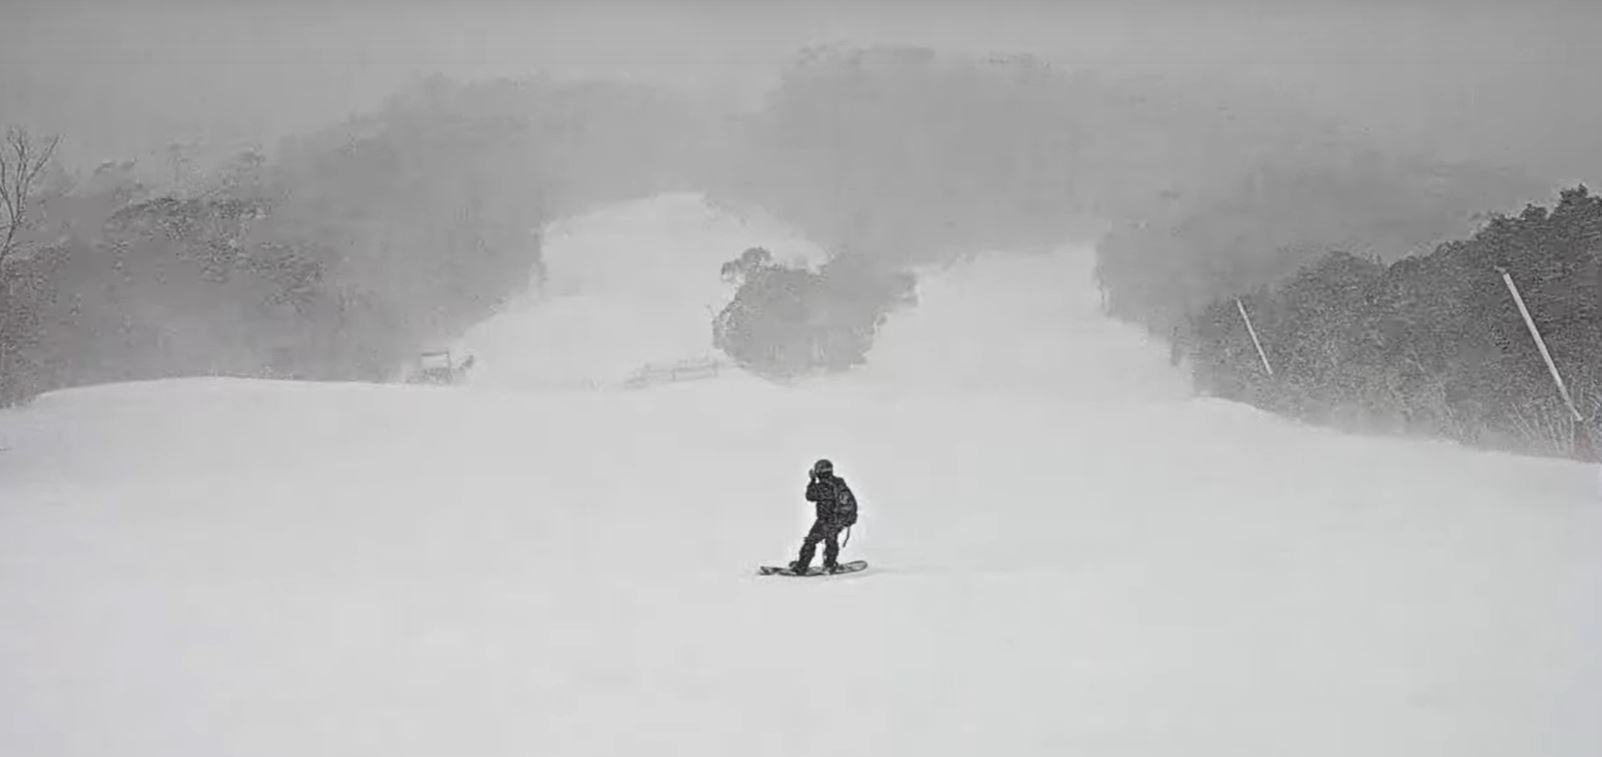 Wild and woolly day in the Australian Alps with temps that feel like minus 17